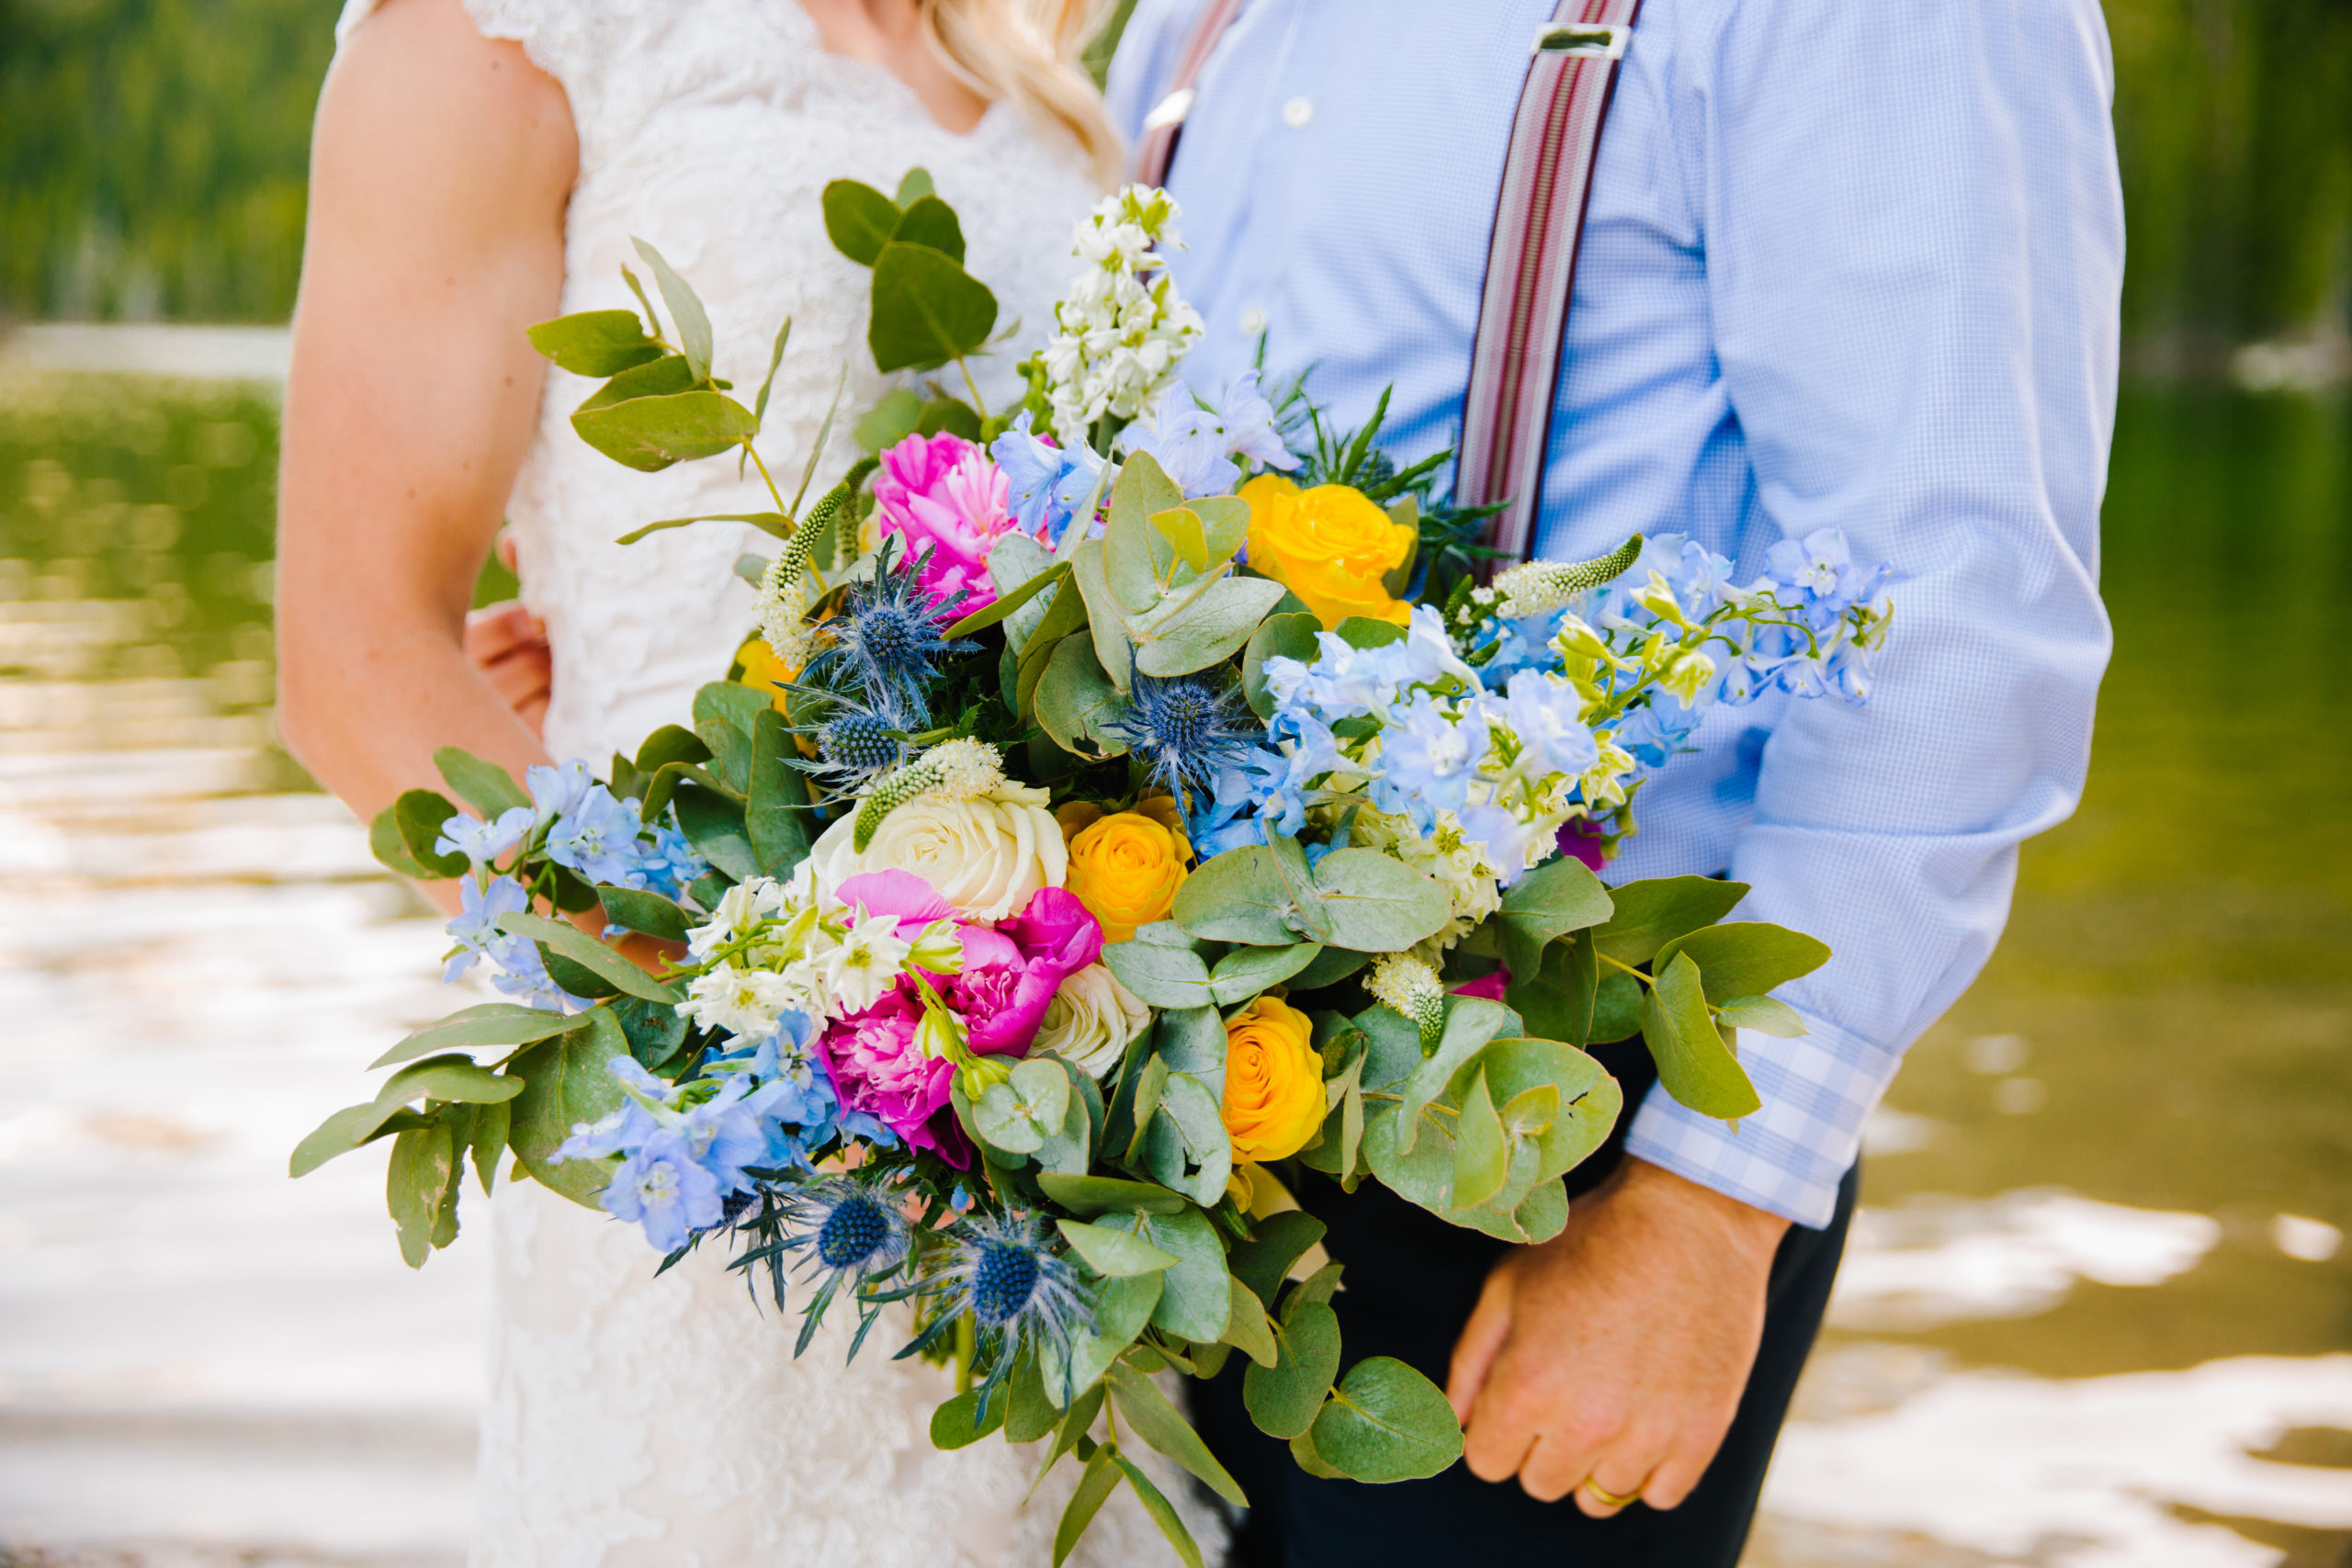 Jackson Hole wedding florists design a bright and colorful wedding bouquet